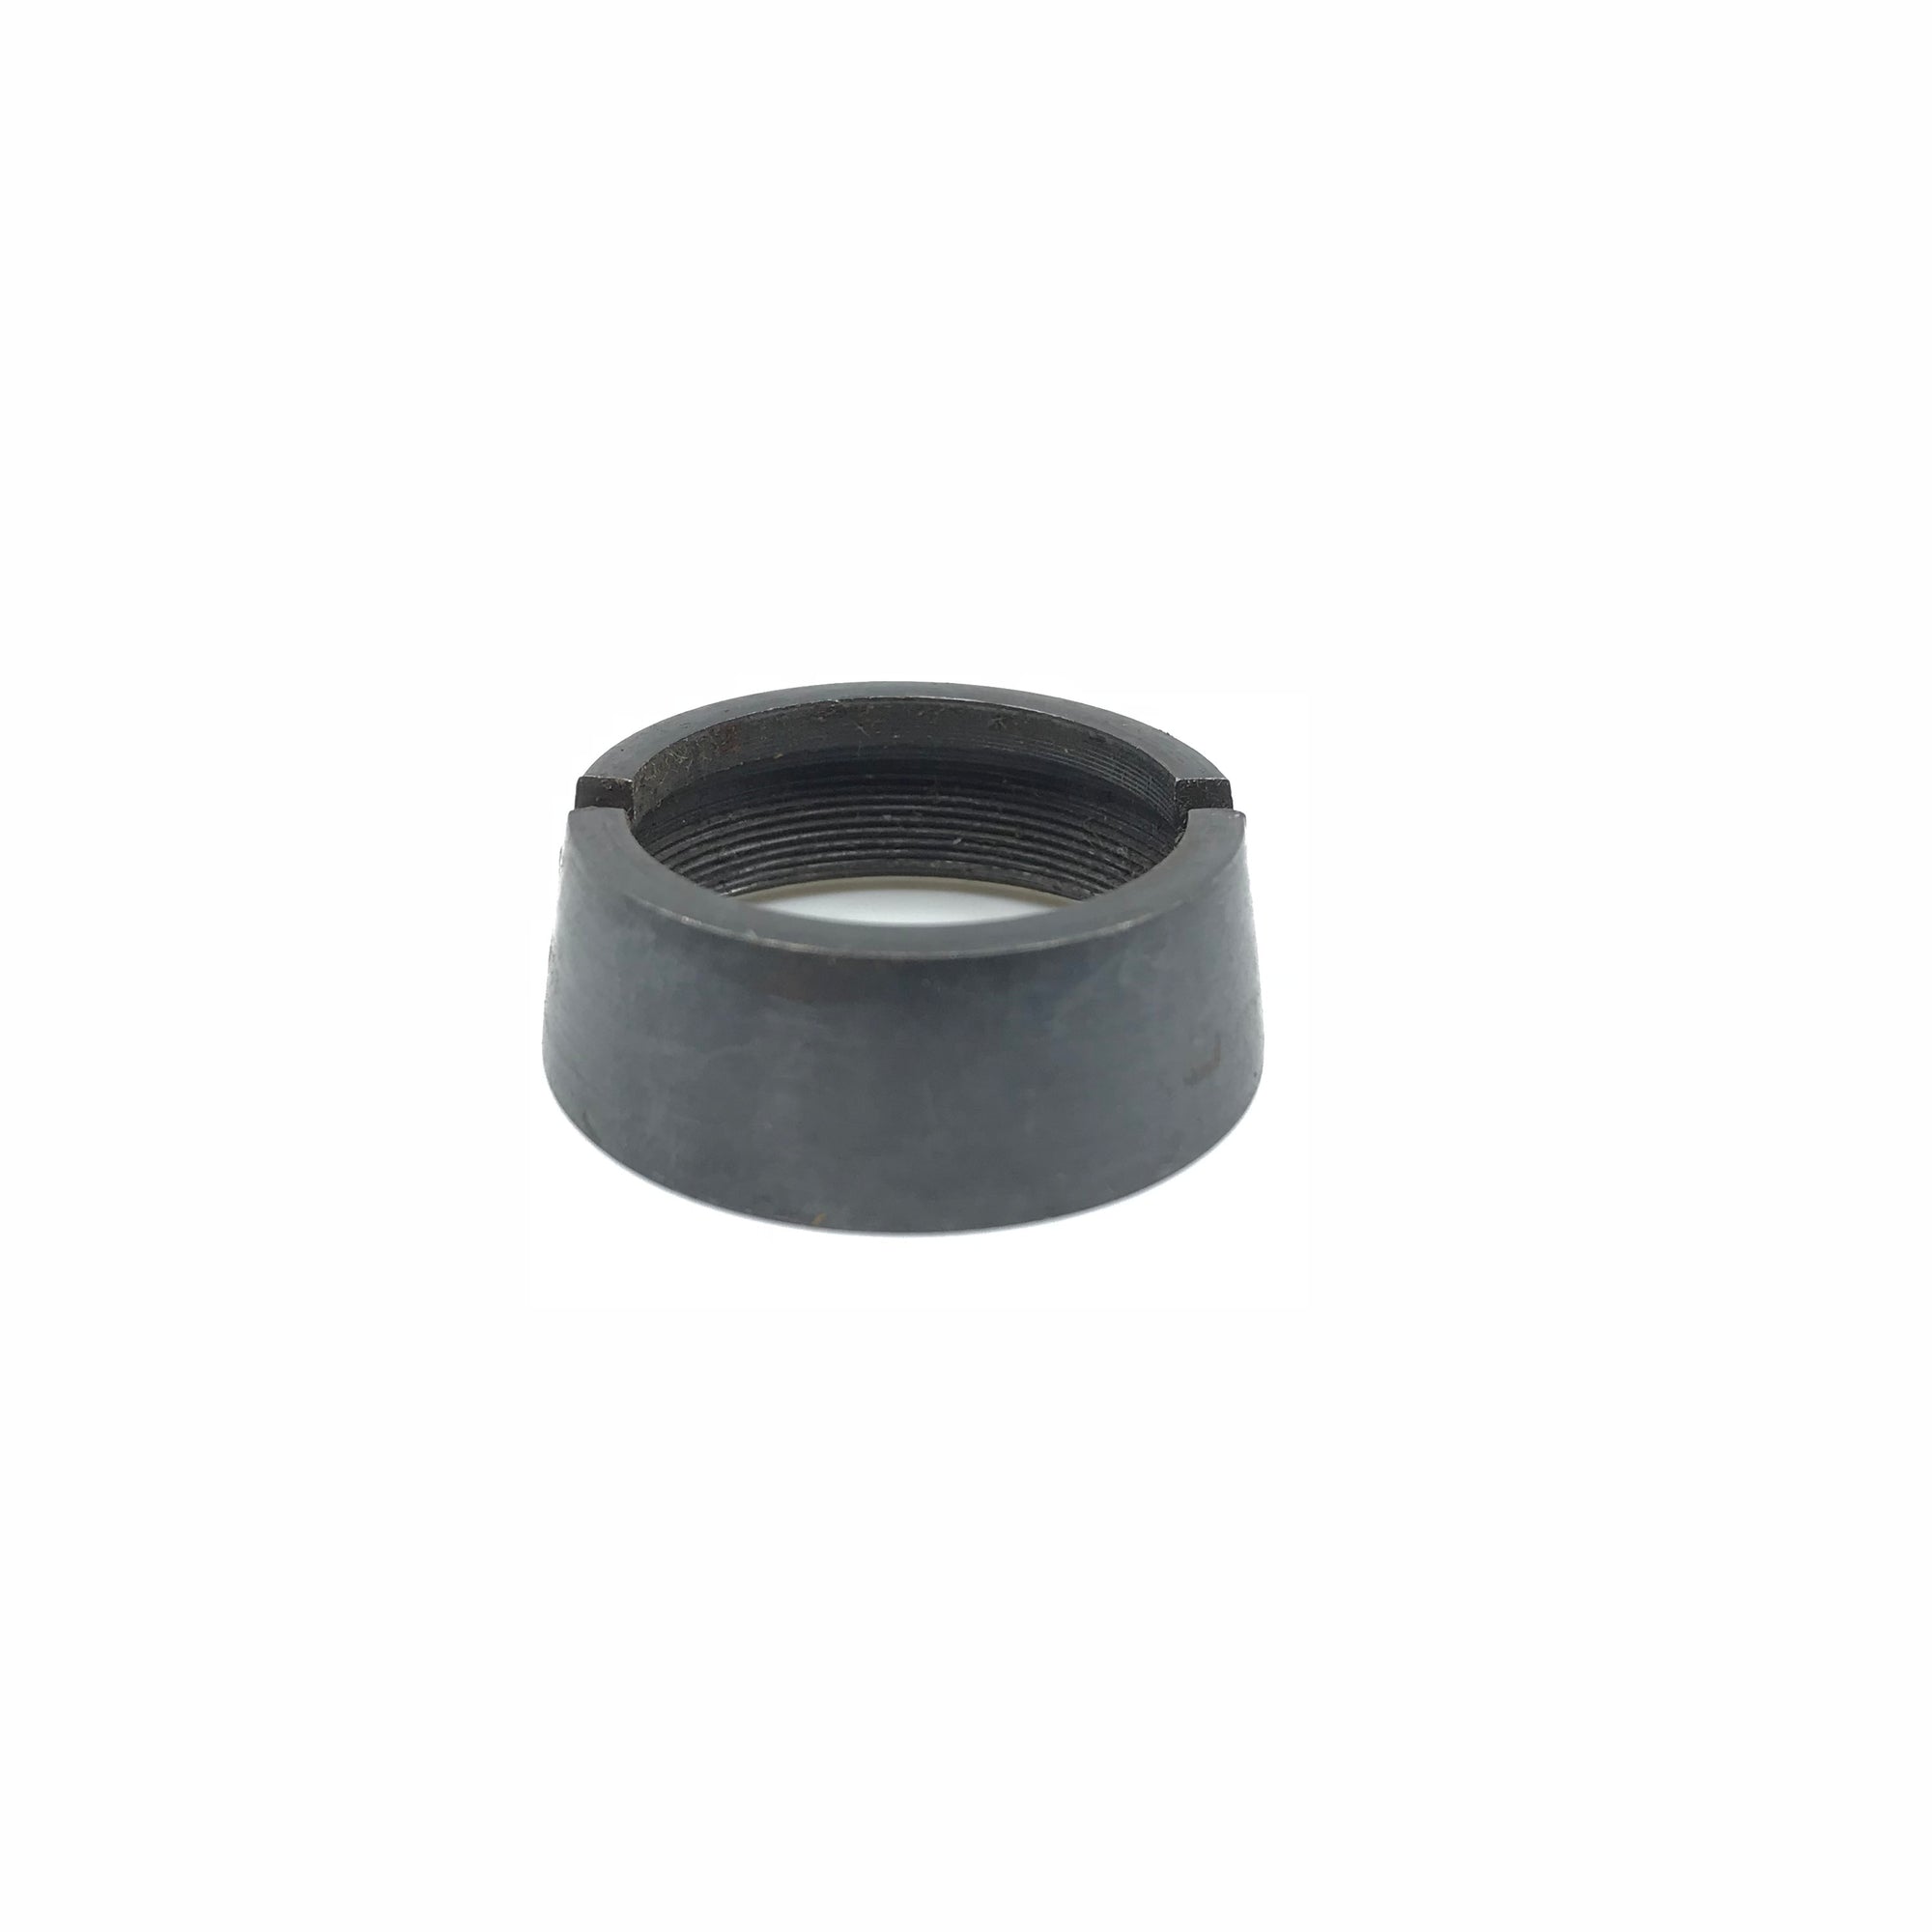 Squires Bingham 1052960A Forward Poerating Sleeve Front Nut